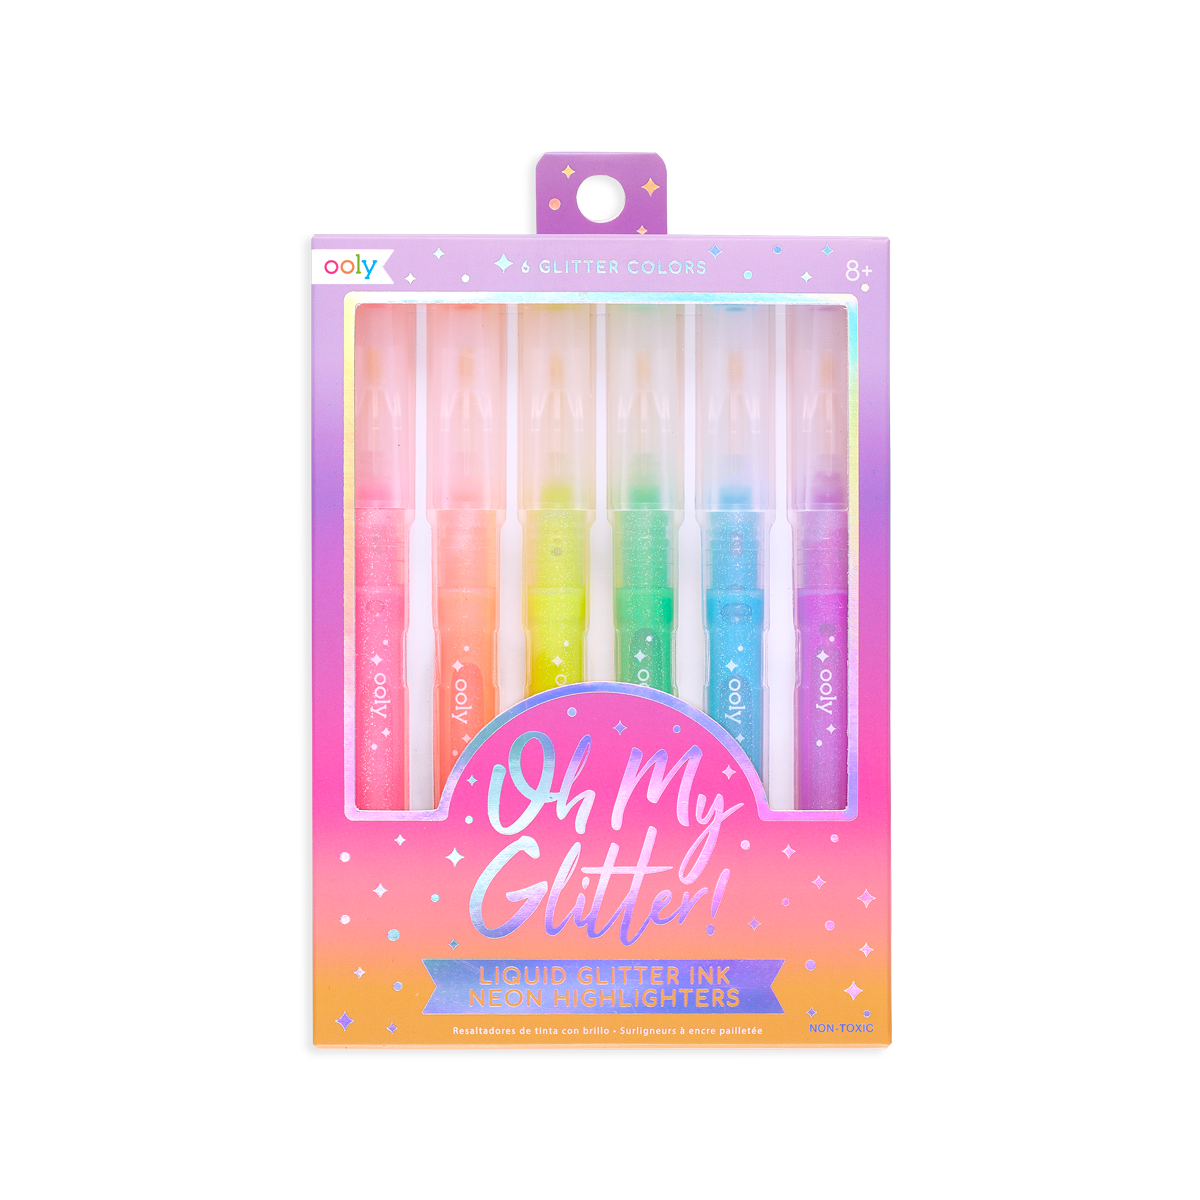 Ooly Oh my Glitter! Retractable Gel Pens - Set of 12